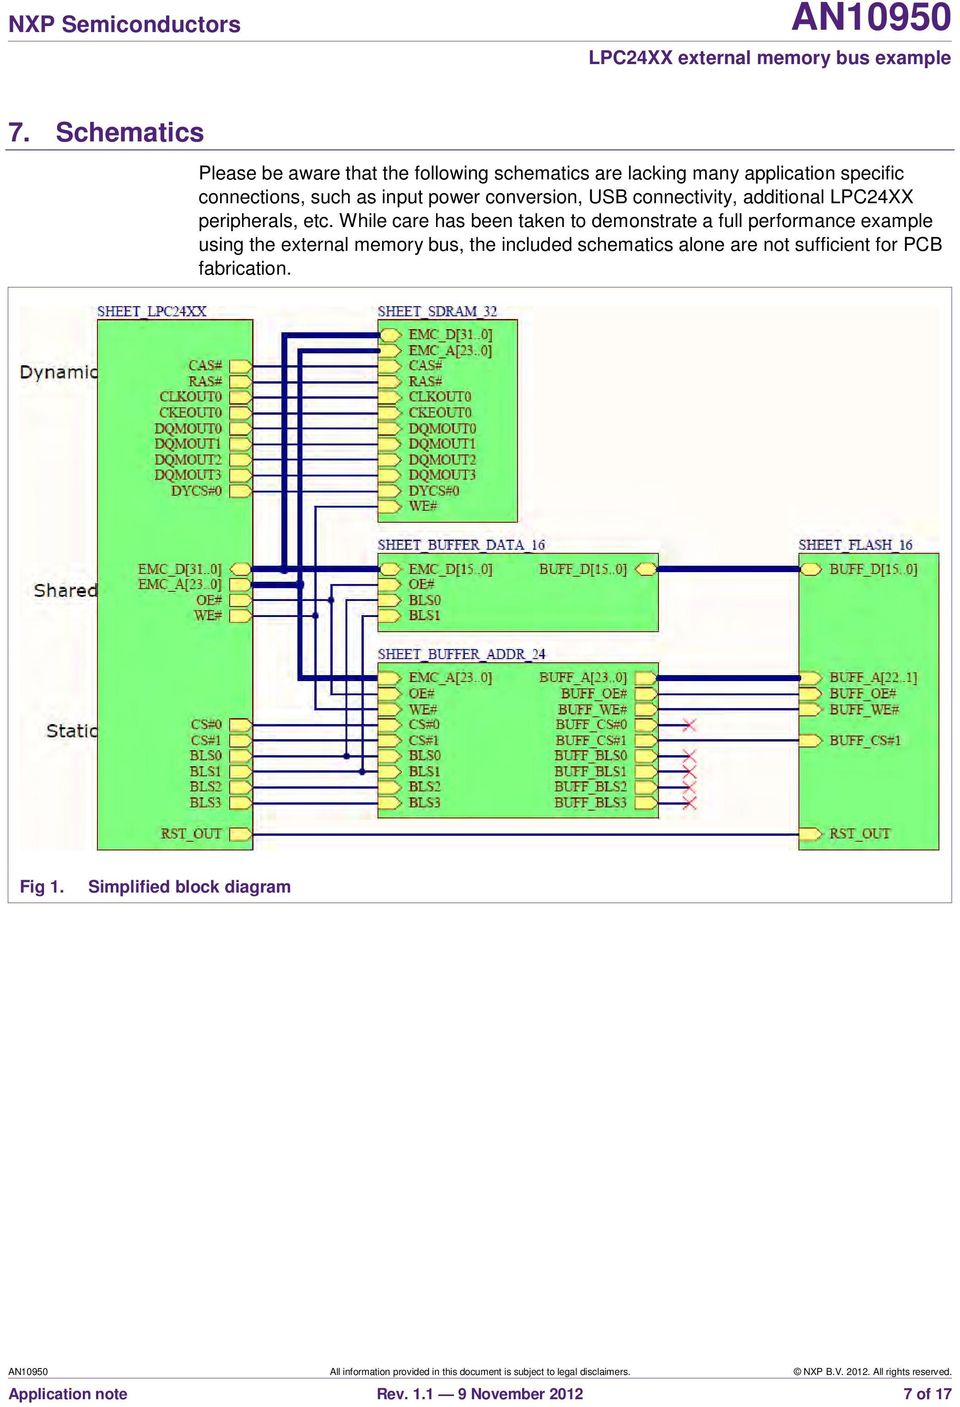 While care has been taken to demonstrate a full performance example using the external memory bus, the included schematics alone are not